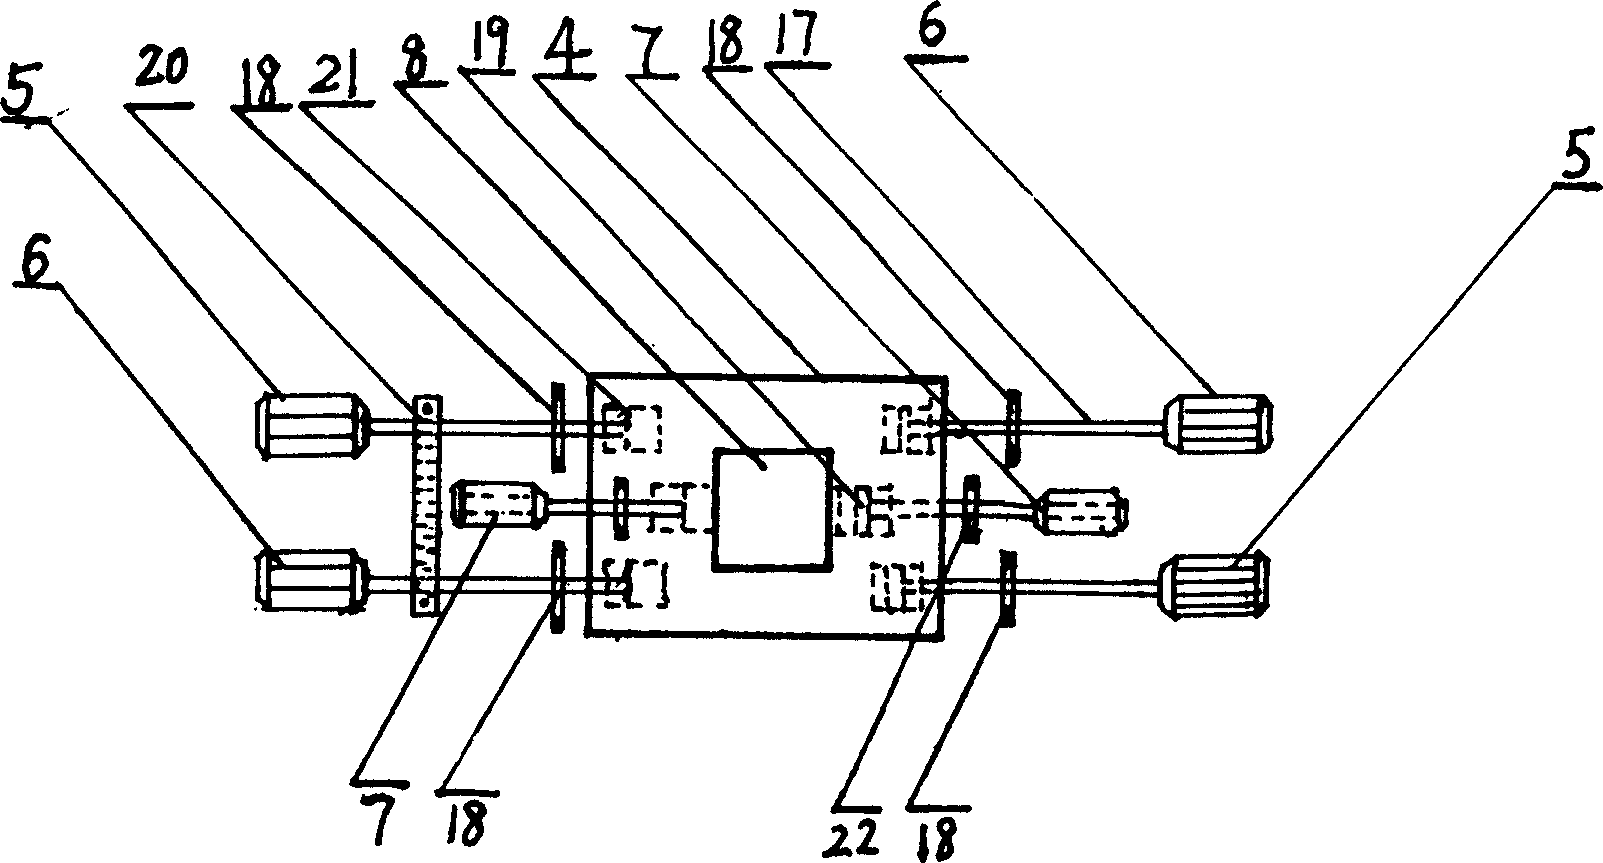 Frequency-modulated, amplitude-modulated resultant force forming machine